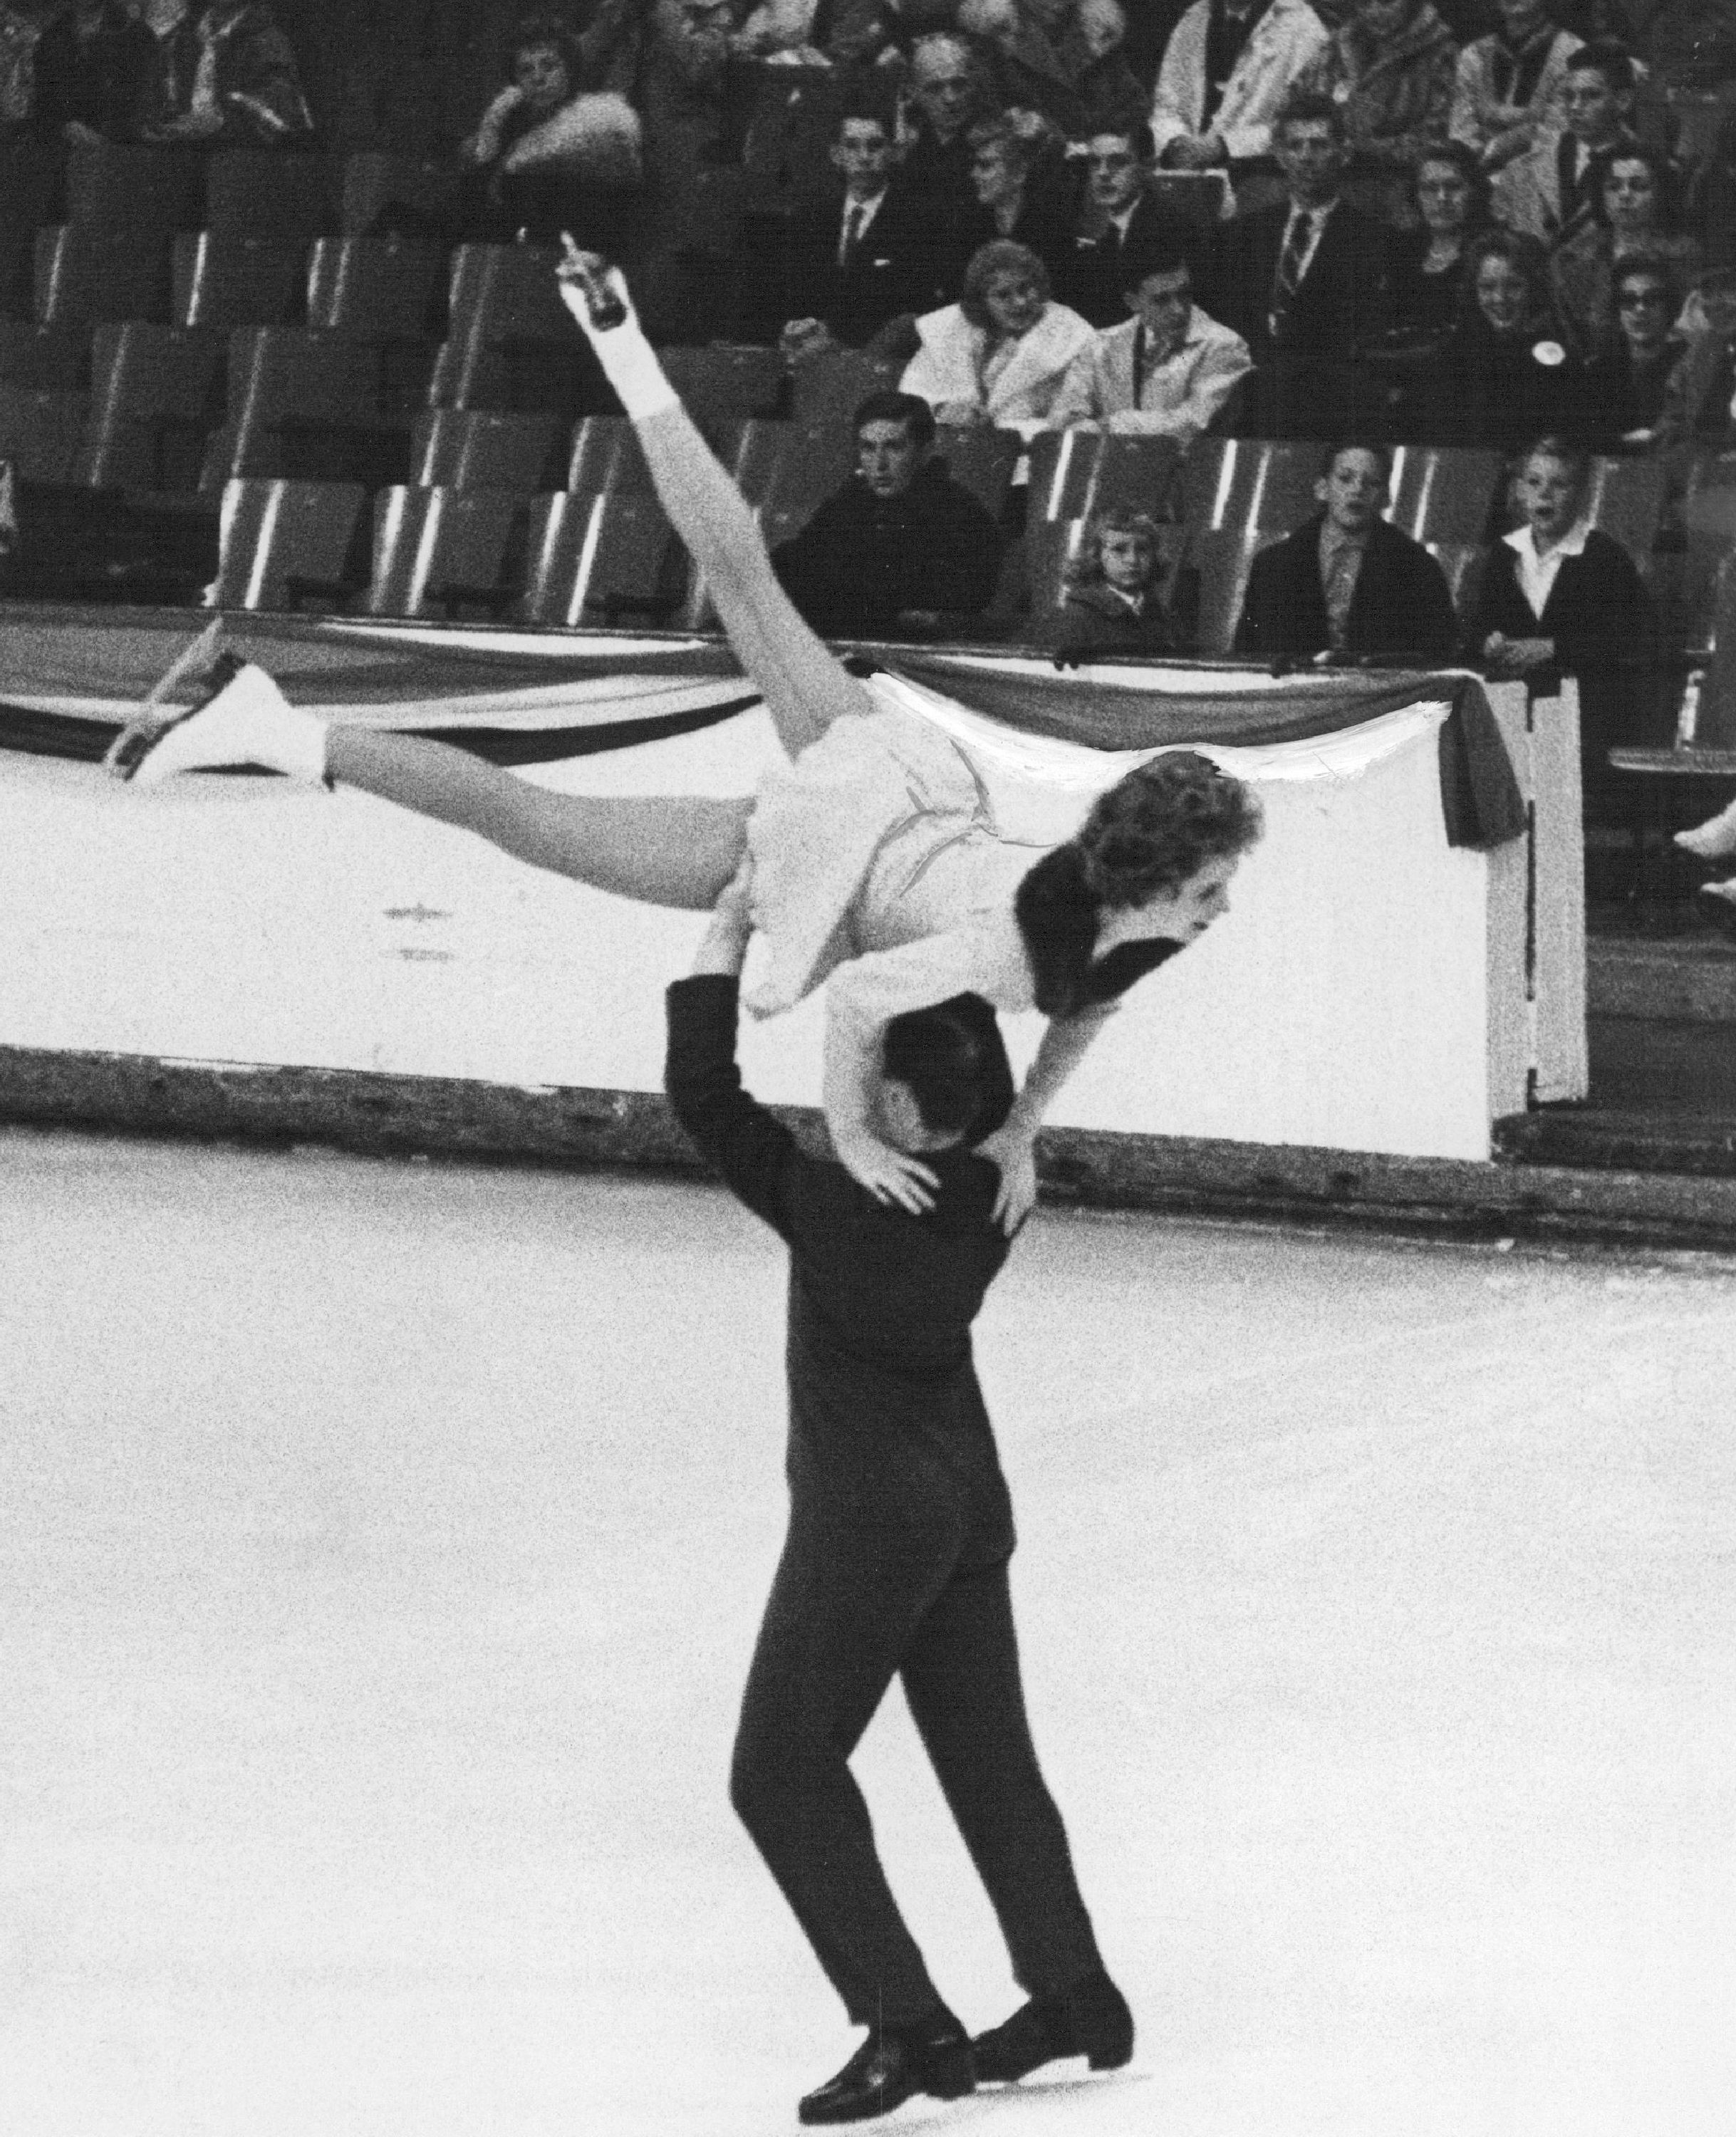 Dudley Richards lifts Maribel Y. Owen in a winning effort in the Senior Pairs competition at the National Figure Skating Championships in Colorado Springs, on Jan. 28, 1961. (Denver Post/Getty Images)